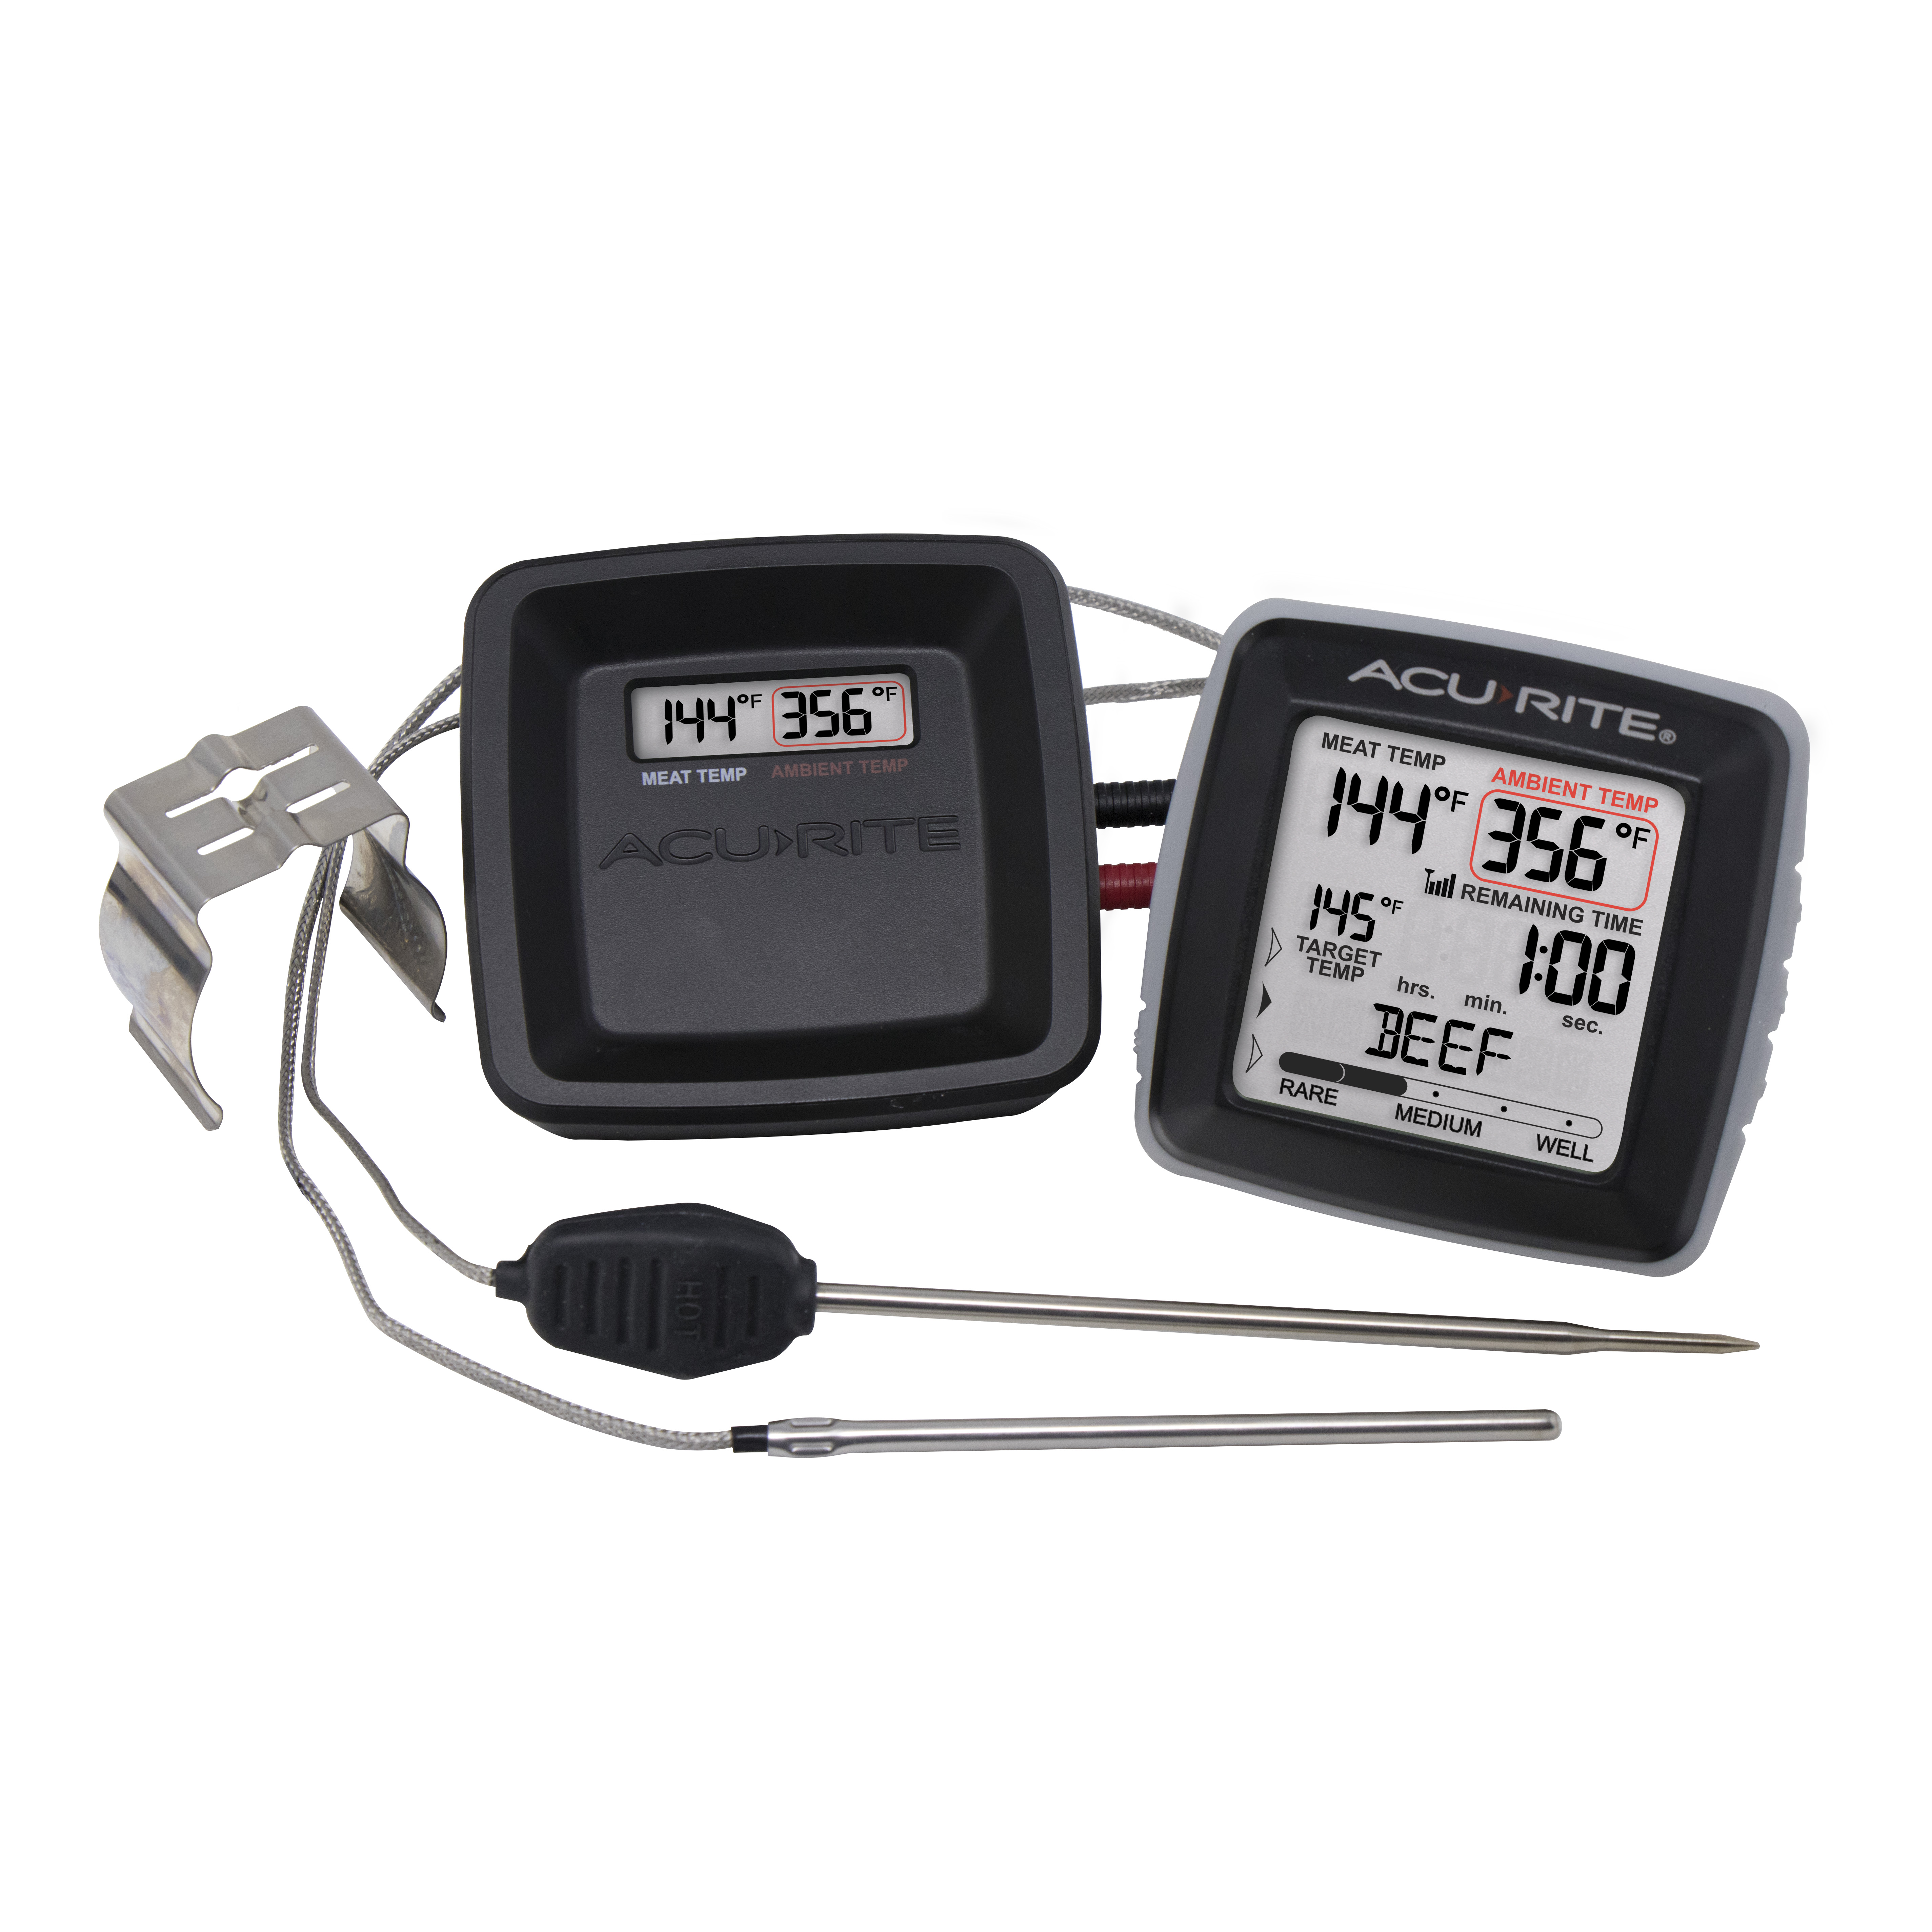 00515M - Brushed SS Digital Thermometer